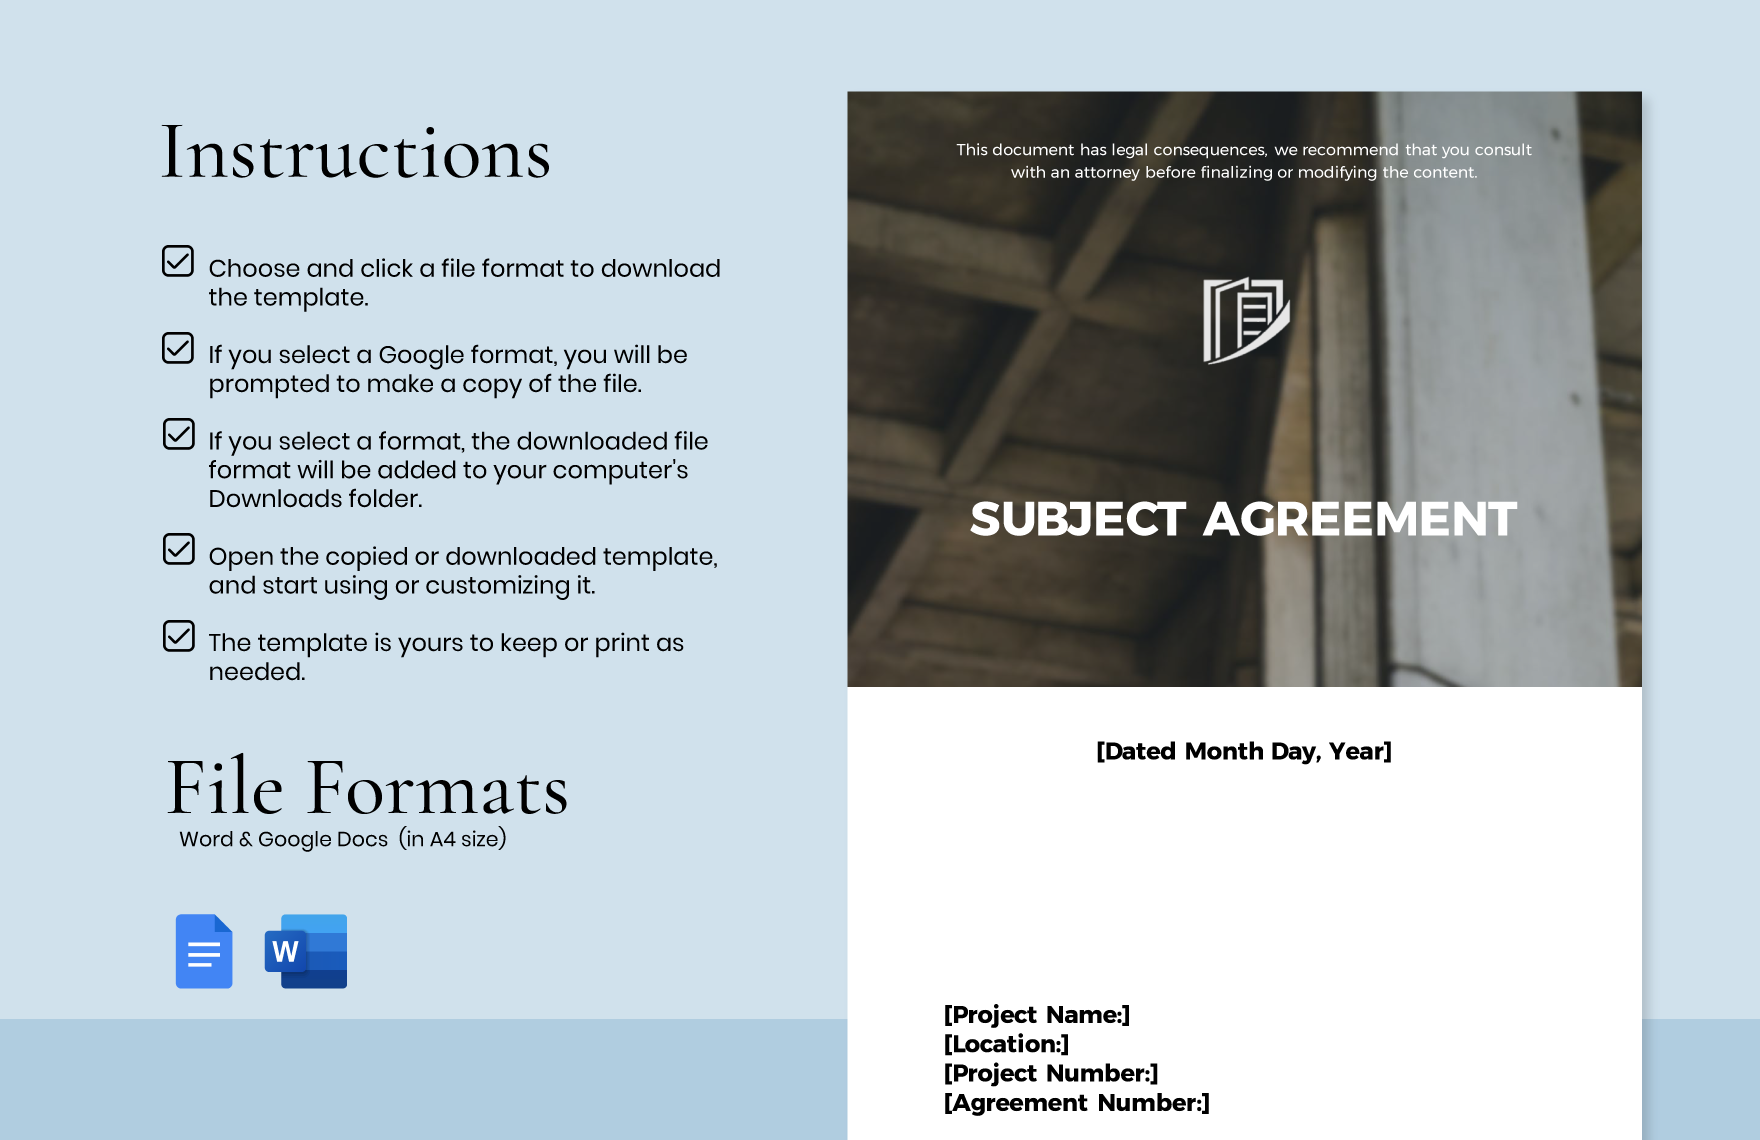 Sample Construction Agreement Template